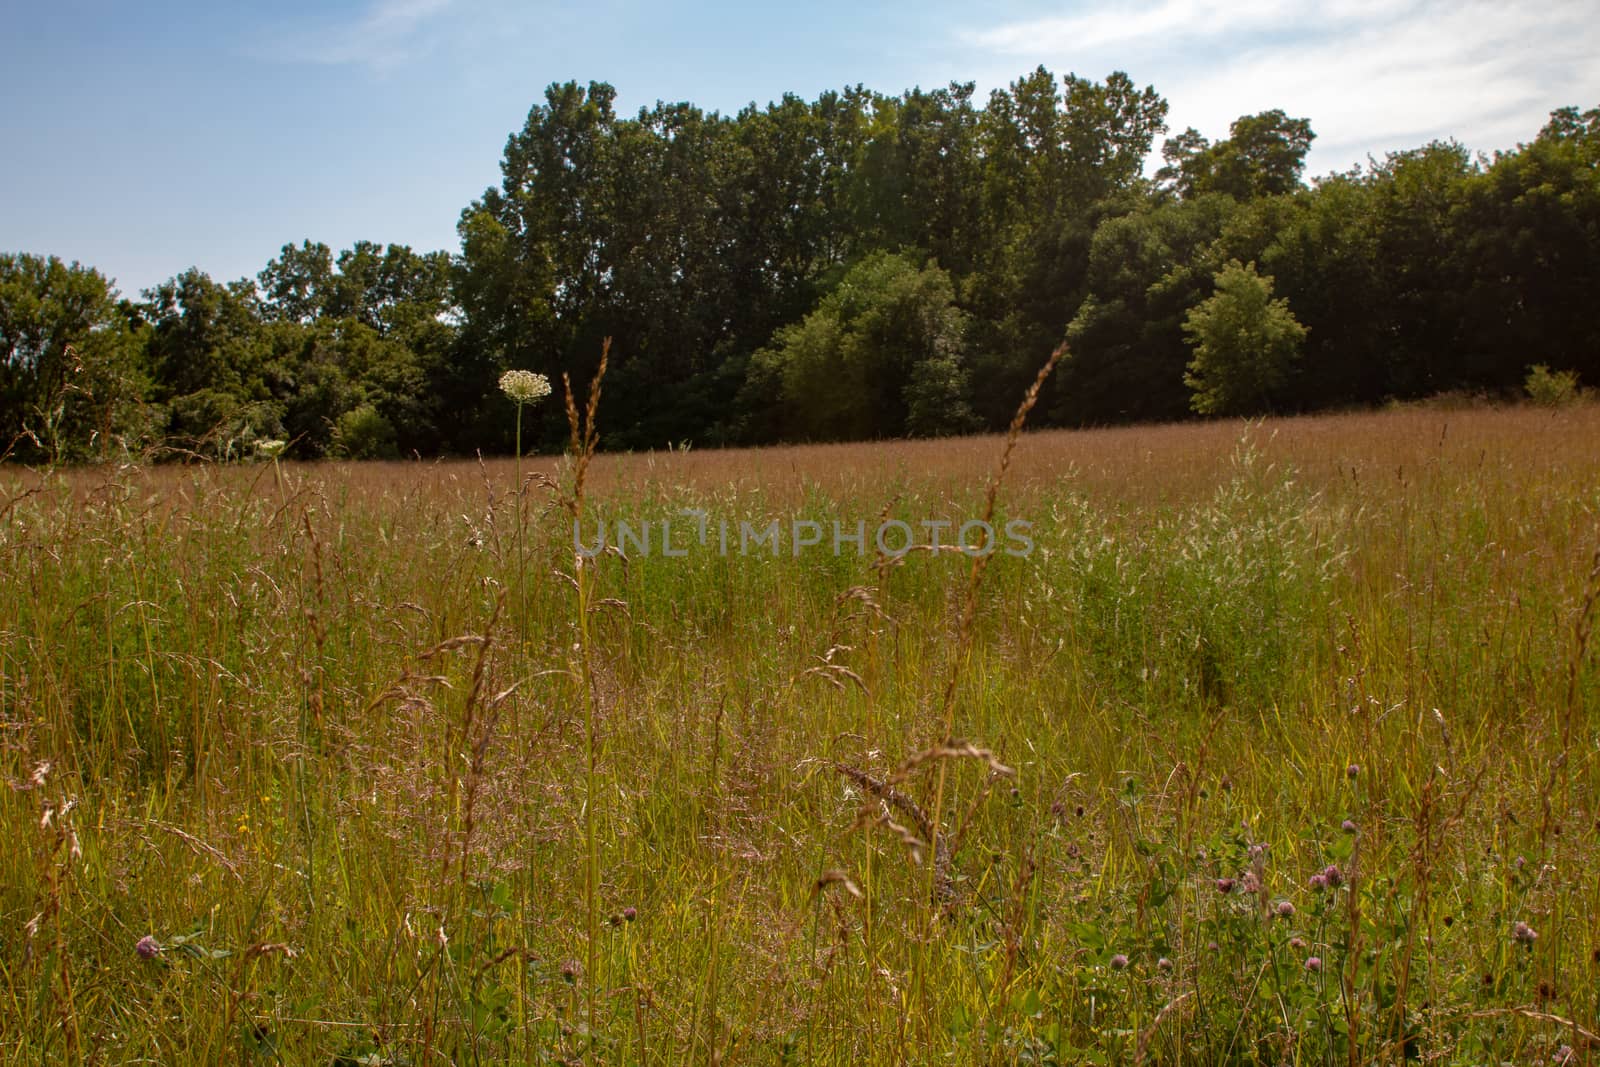 An ontario landscape photo with various species of grass and wild flowers